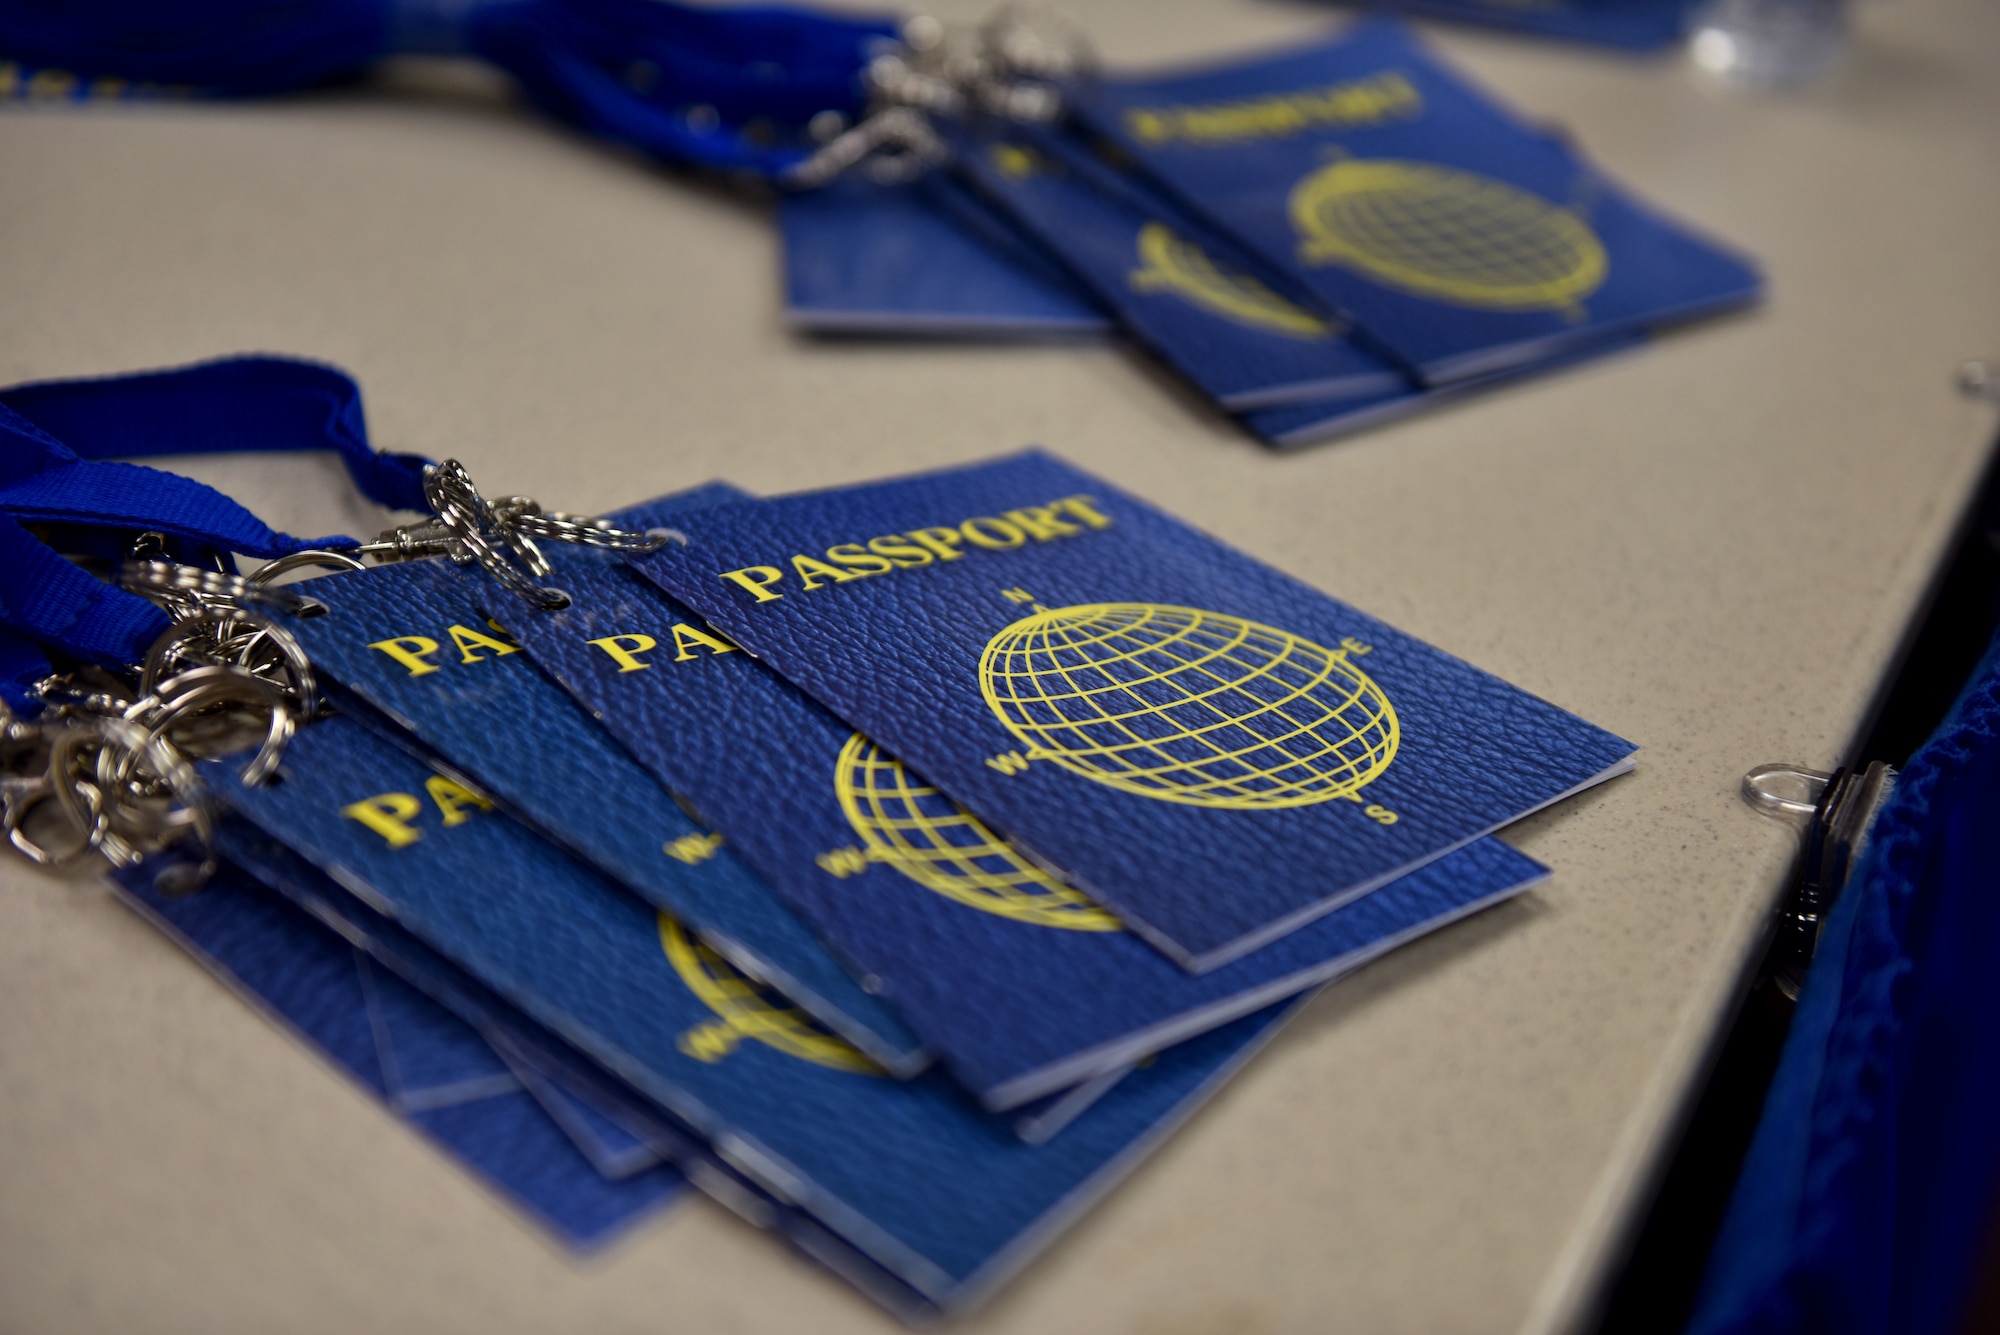 Passports line a table at the Around the World International Cultural Fair at Angelo State University in San Angelo, Texas, April 29, 2021. The passports were used by students as they toured booths displaying different items from various cultures. (U.S. Air Force photo by Staff Sgt. Seraiah Wolf)